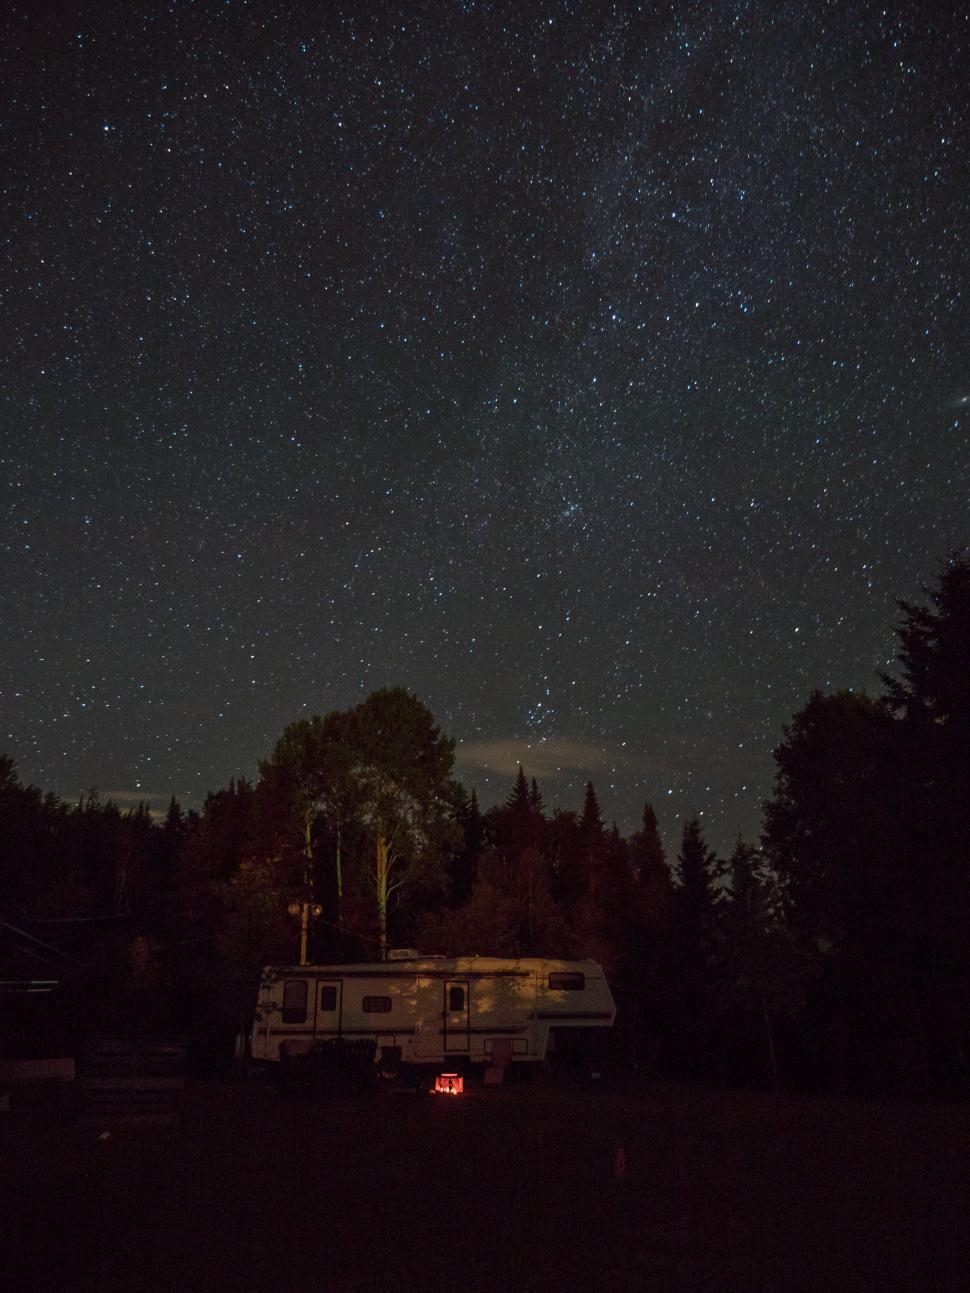 Free Image of Trailer Parked in Field Under Starry Night Sky 